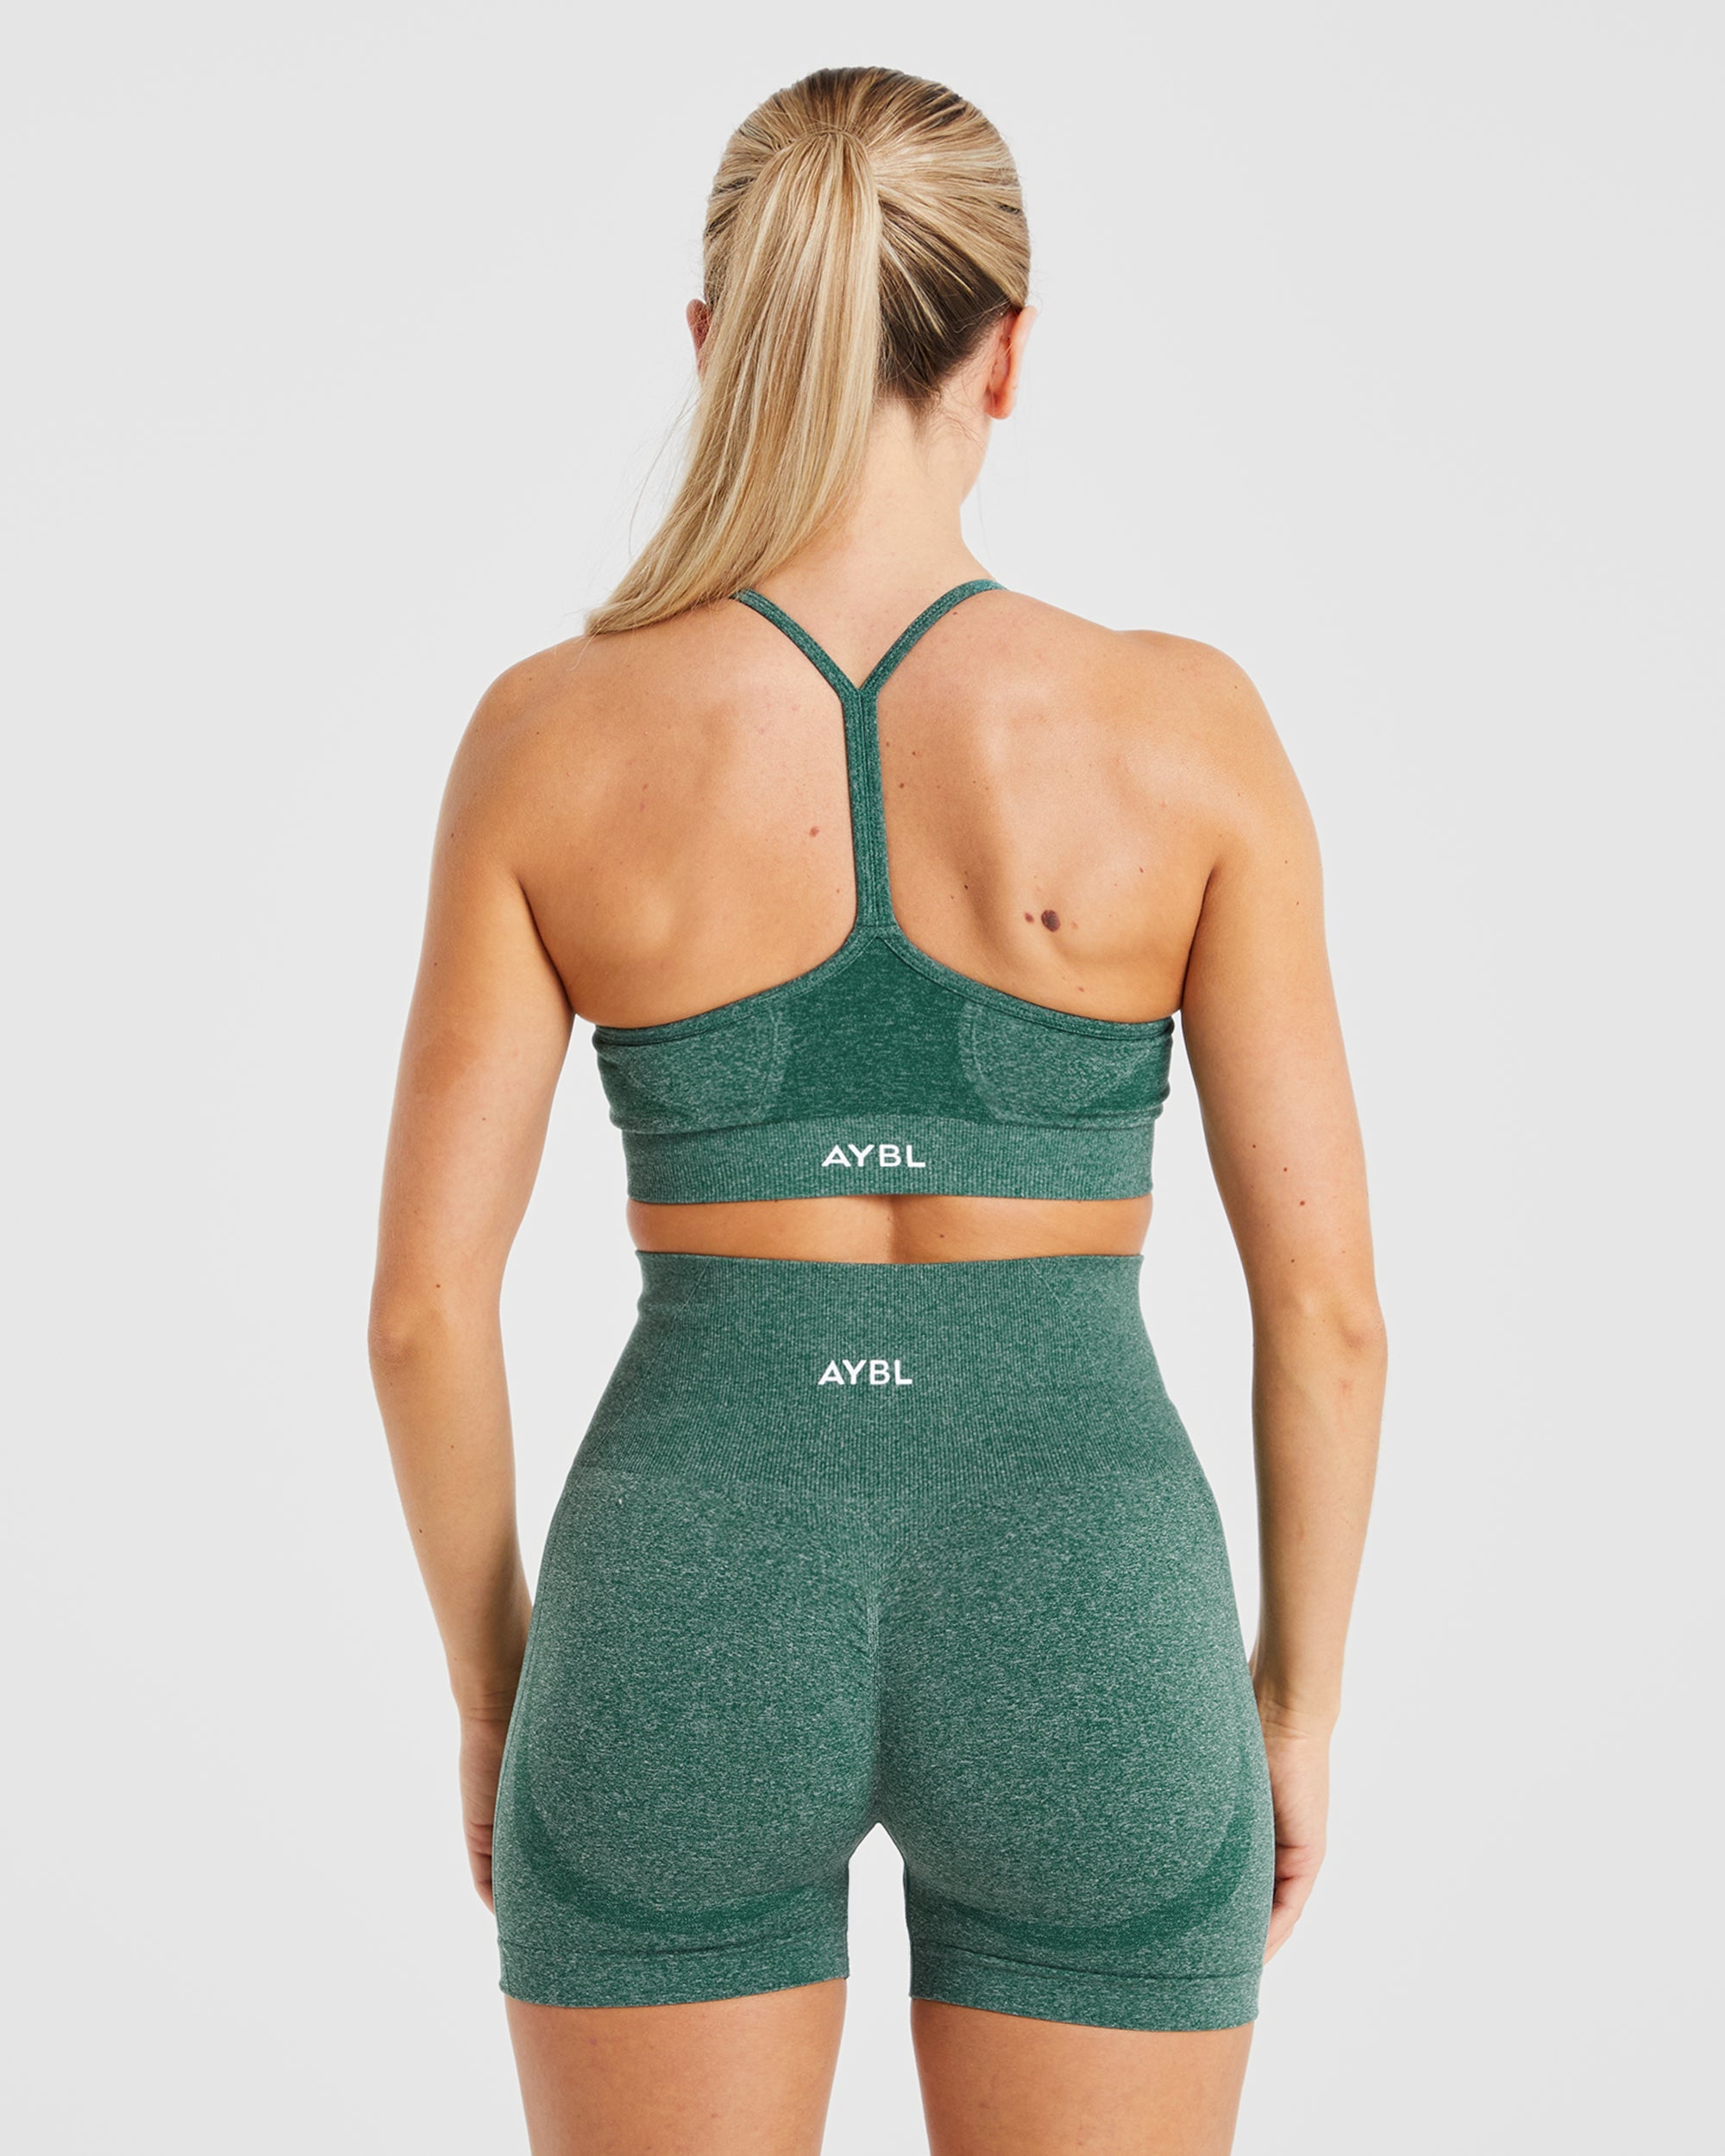 Be Wicked Palmer Microfiber Crop Top and High Waist Booty Shorts